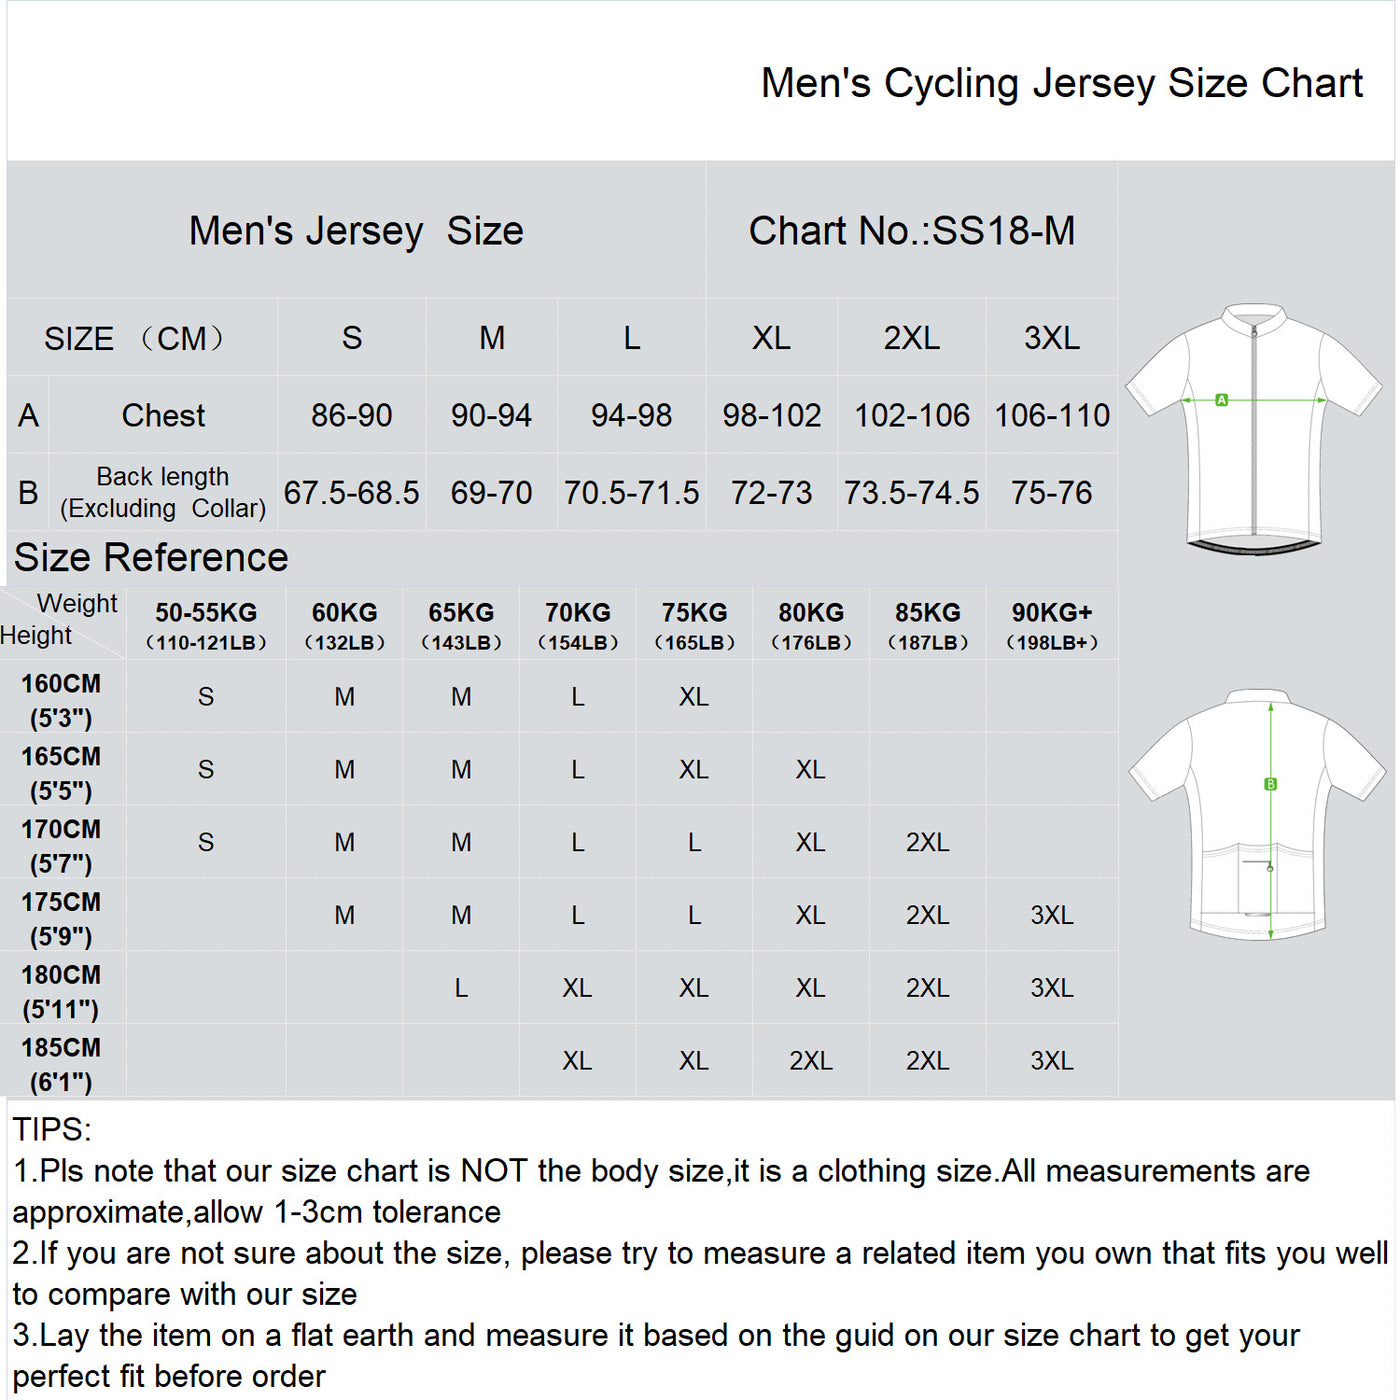 Nuckily Mycycology MG033 Short Sleeves Cycling Jersey - Cyclop.in